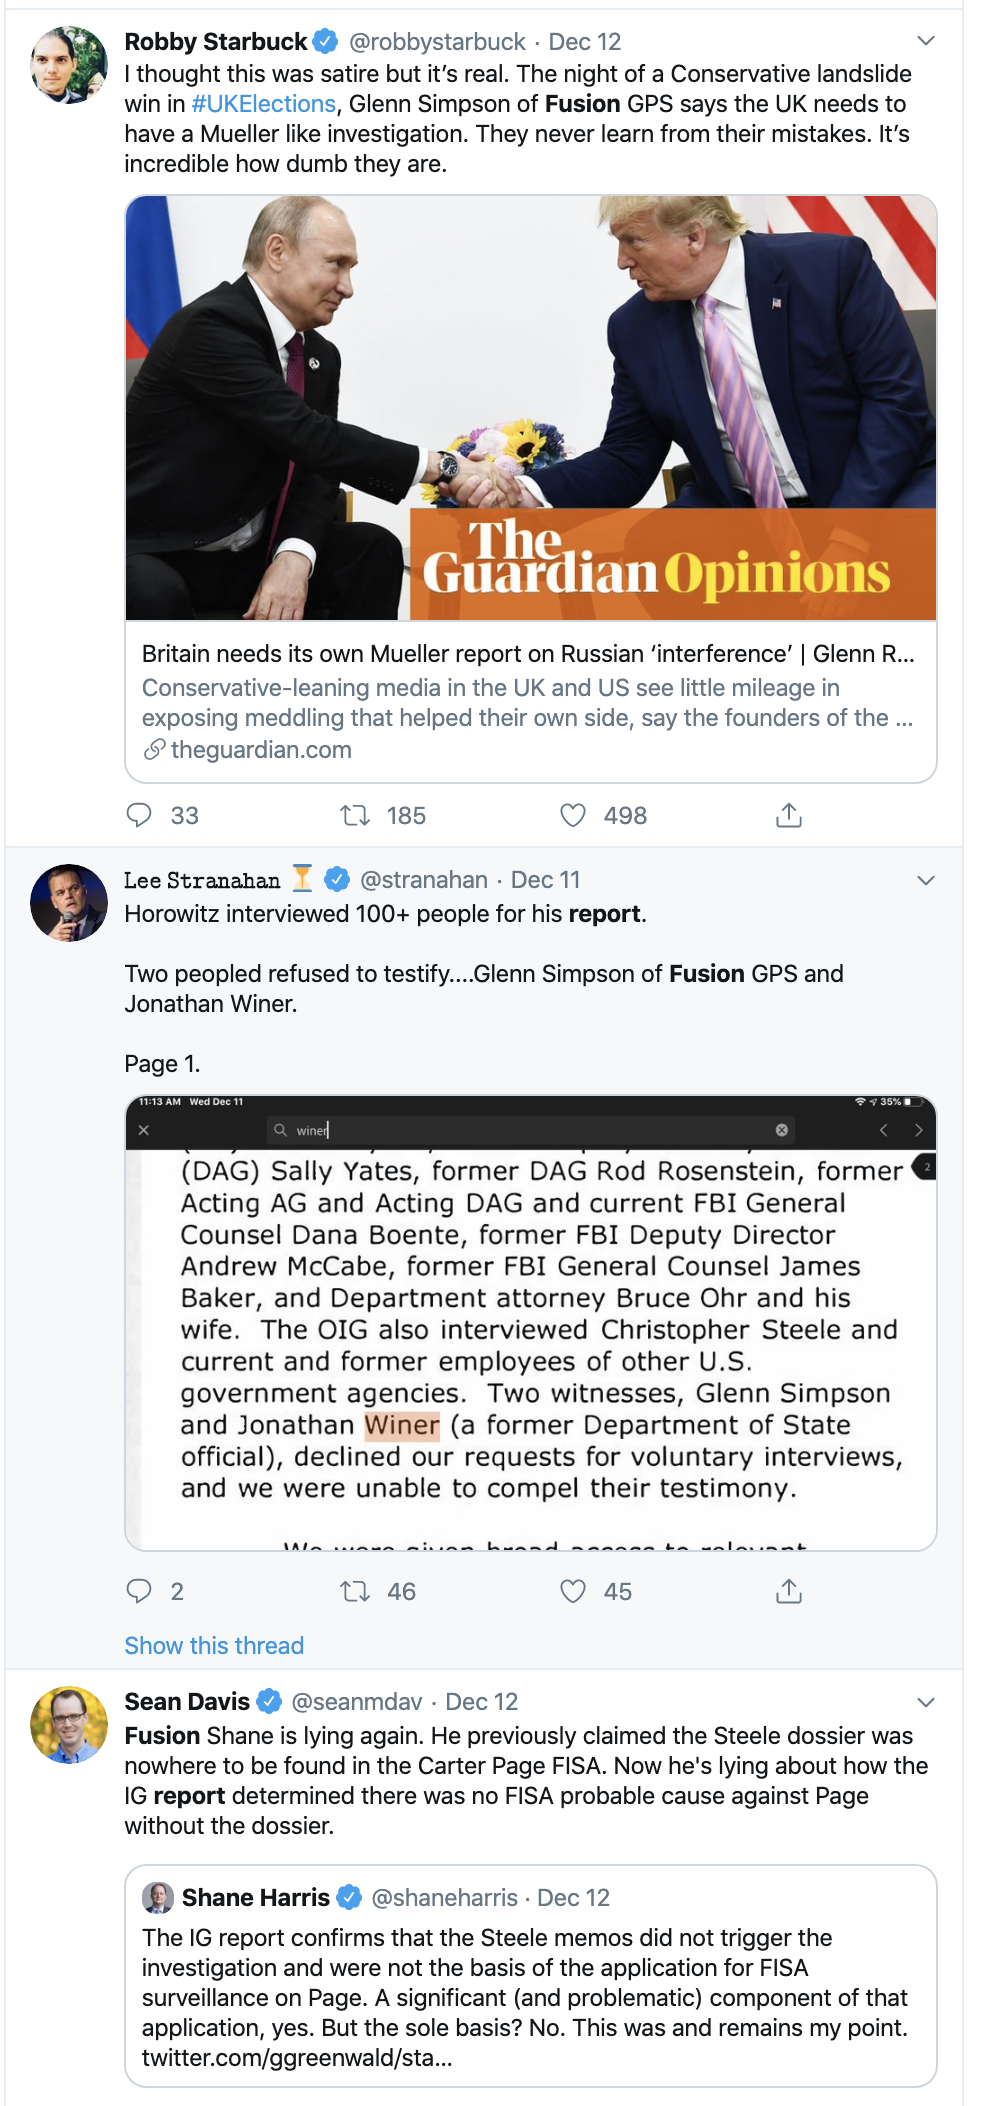 Screen-Shot-2019-12-15-at-4.23.19-PM Jim Jordan's Trove Of Trump/GPS Fusion Lies Exposed Featured Impeachment Investigation National Security Top Stories 